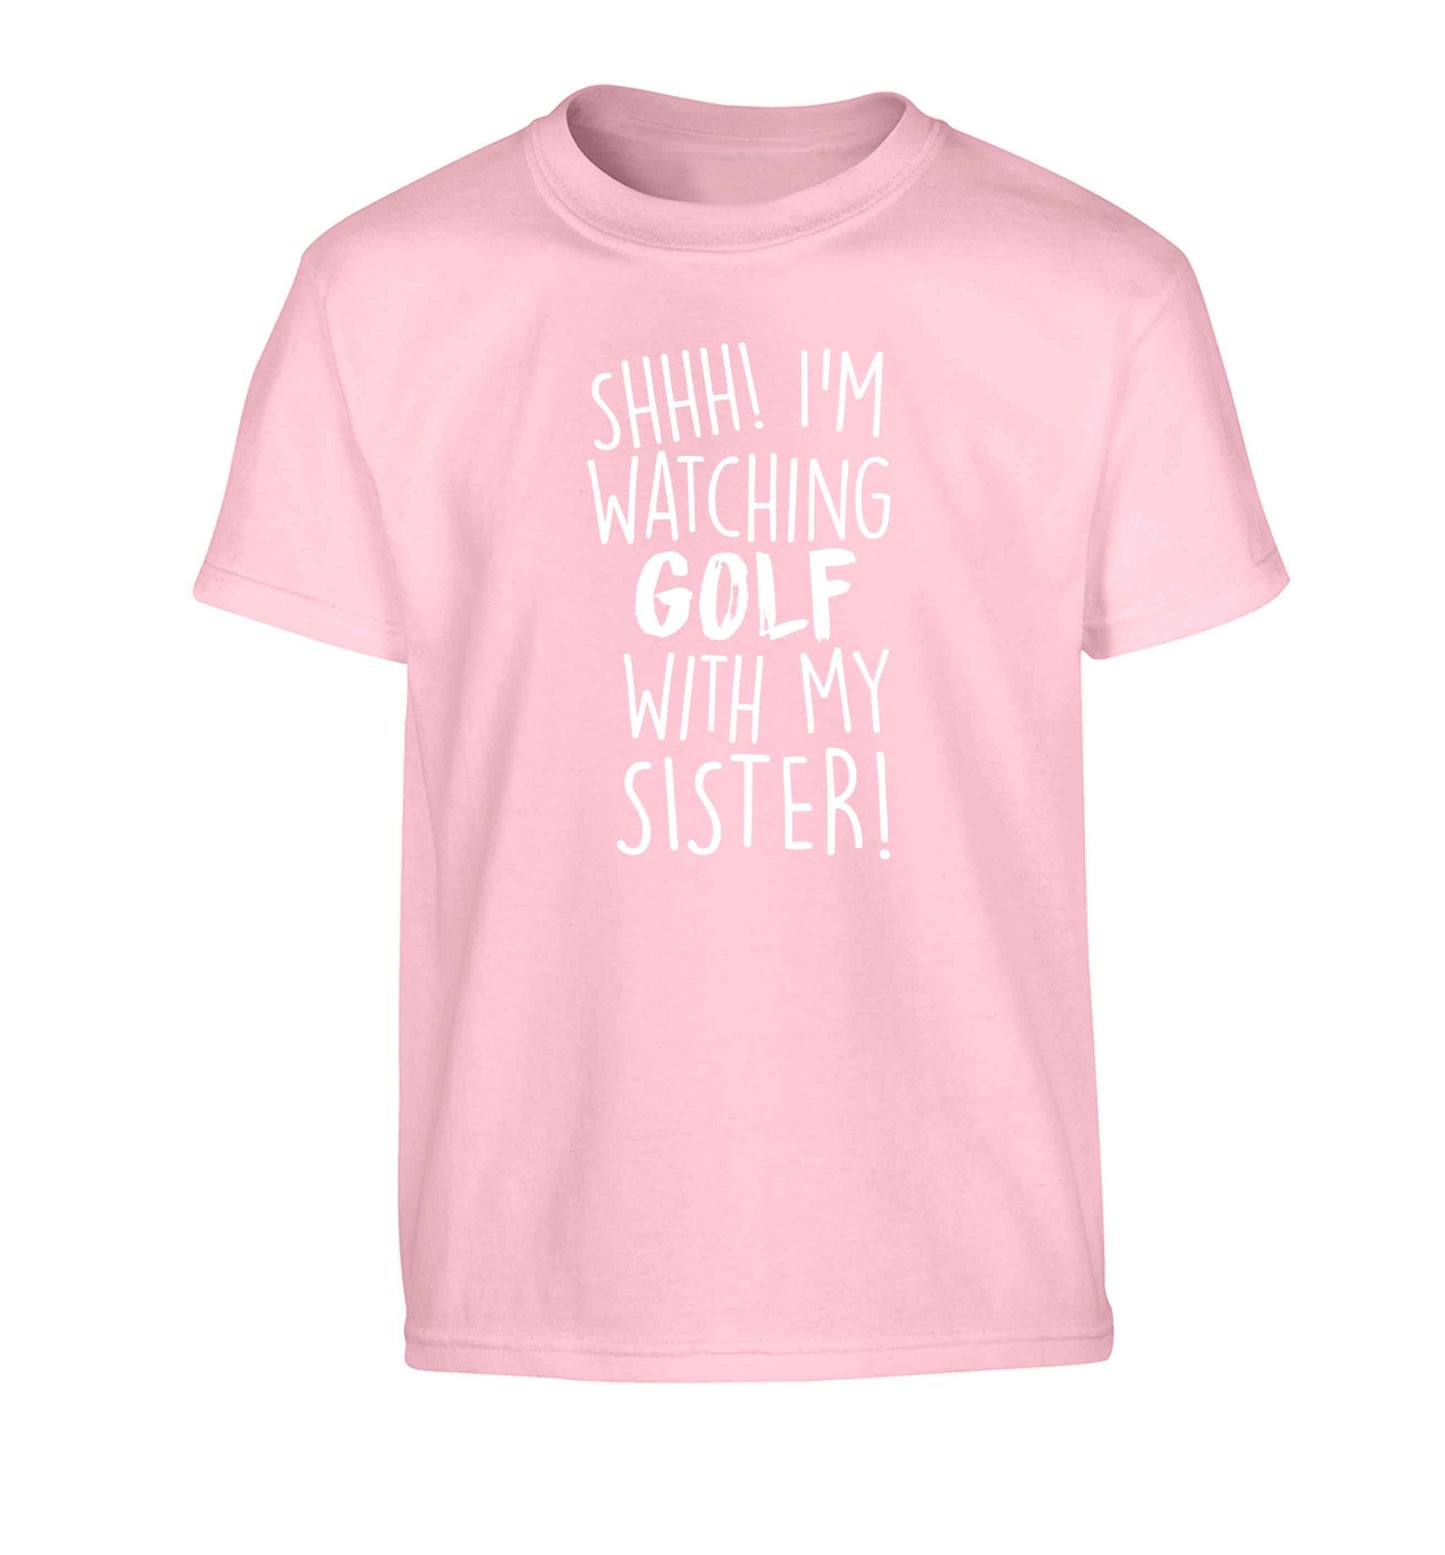 Shh I'm watching golf with my sister Children's light pink Tshirt 12-13 Years